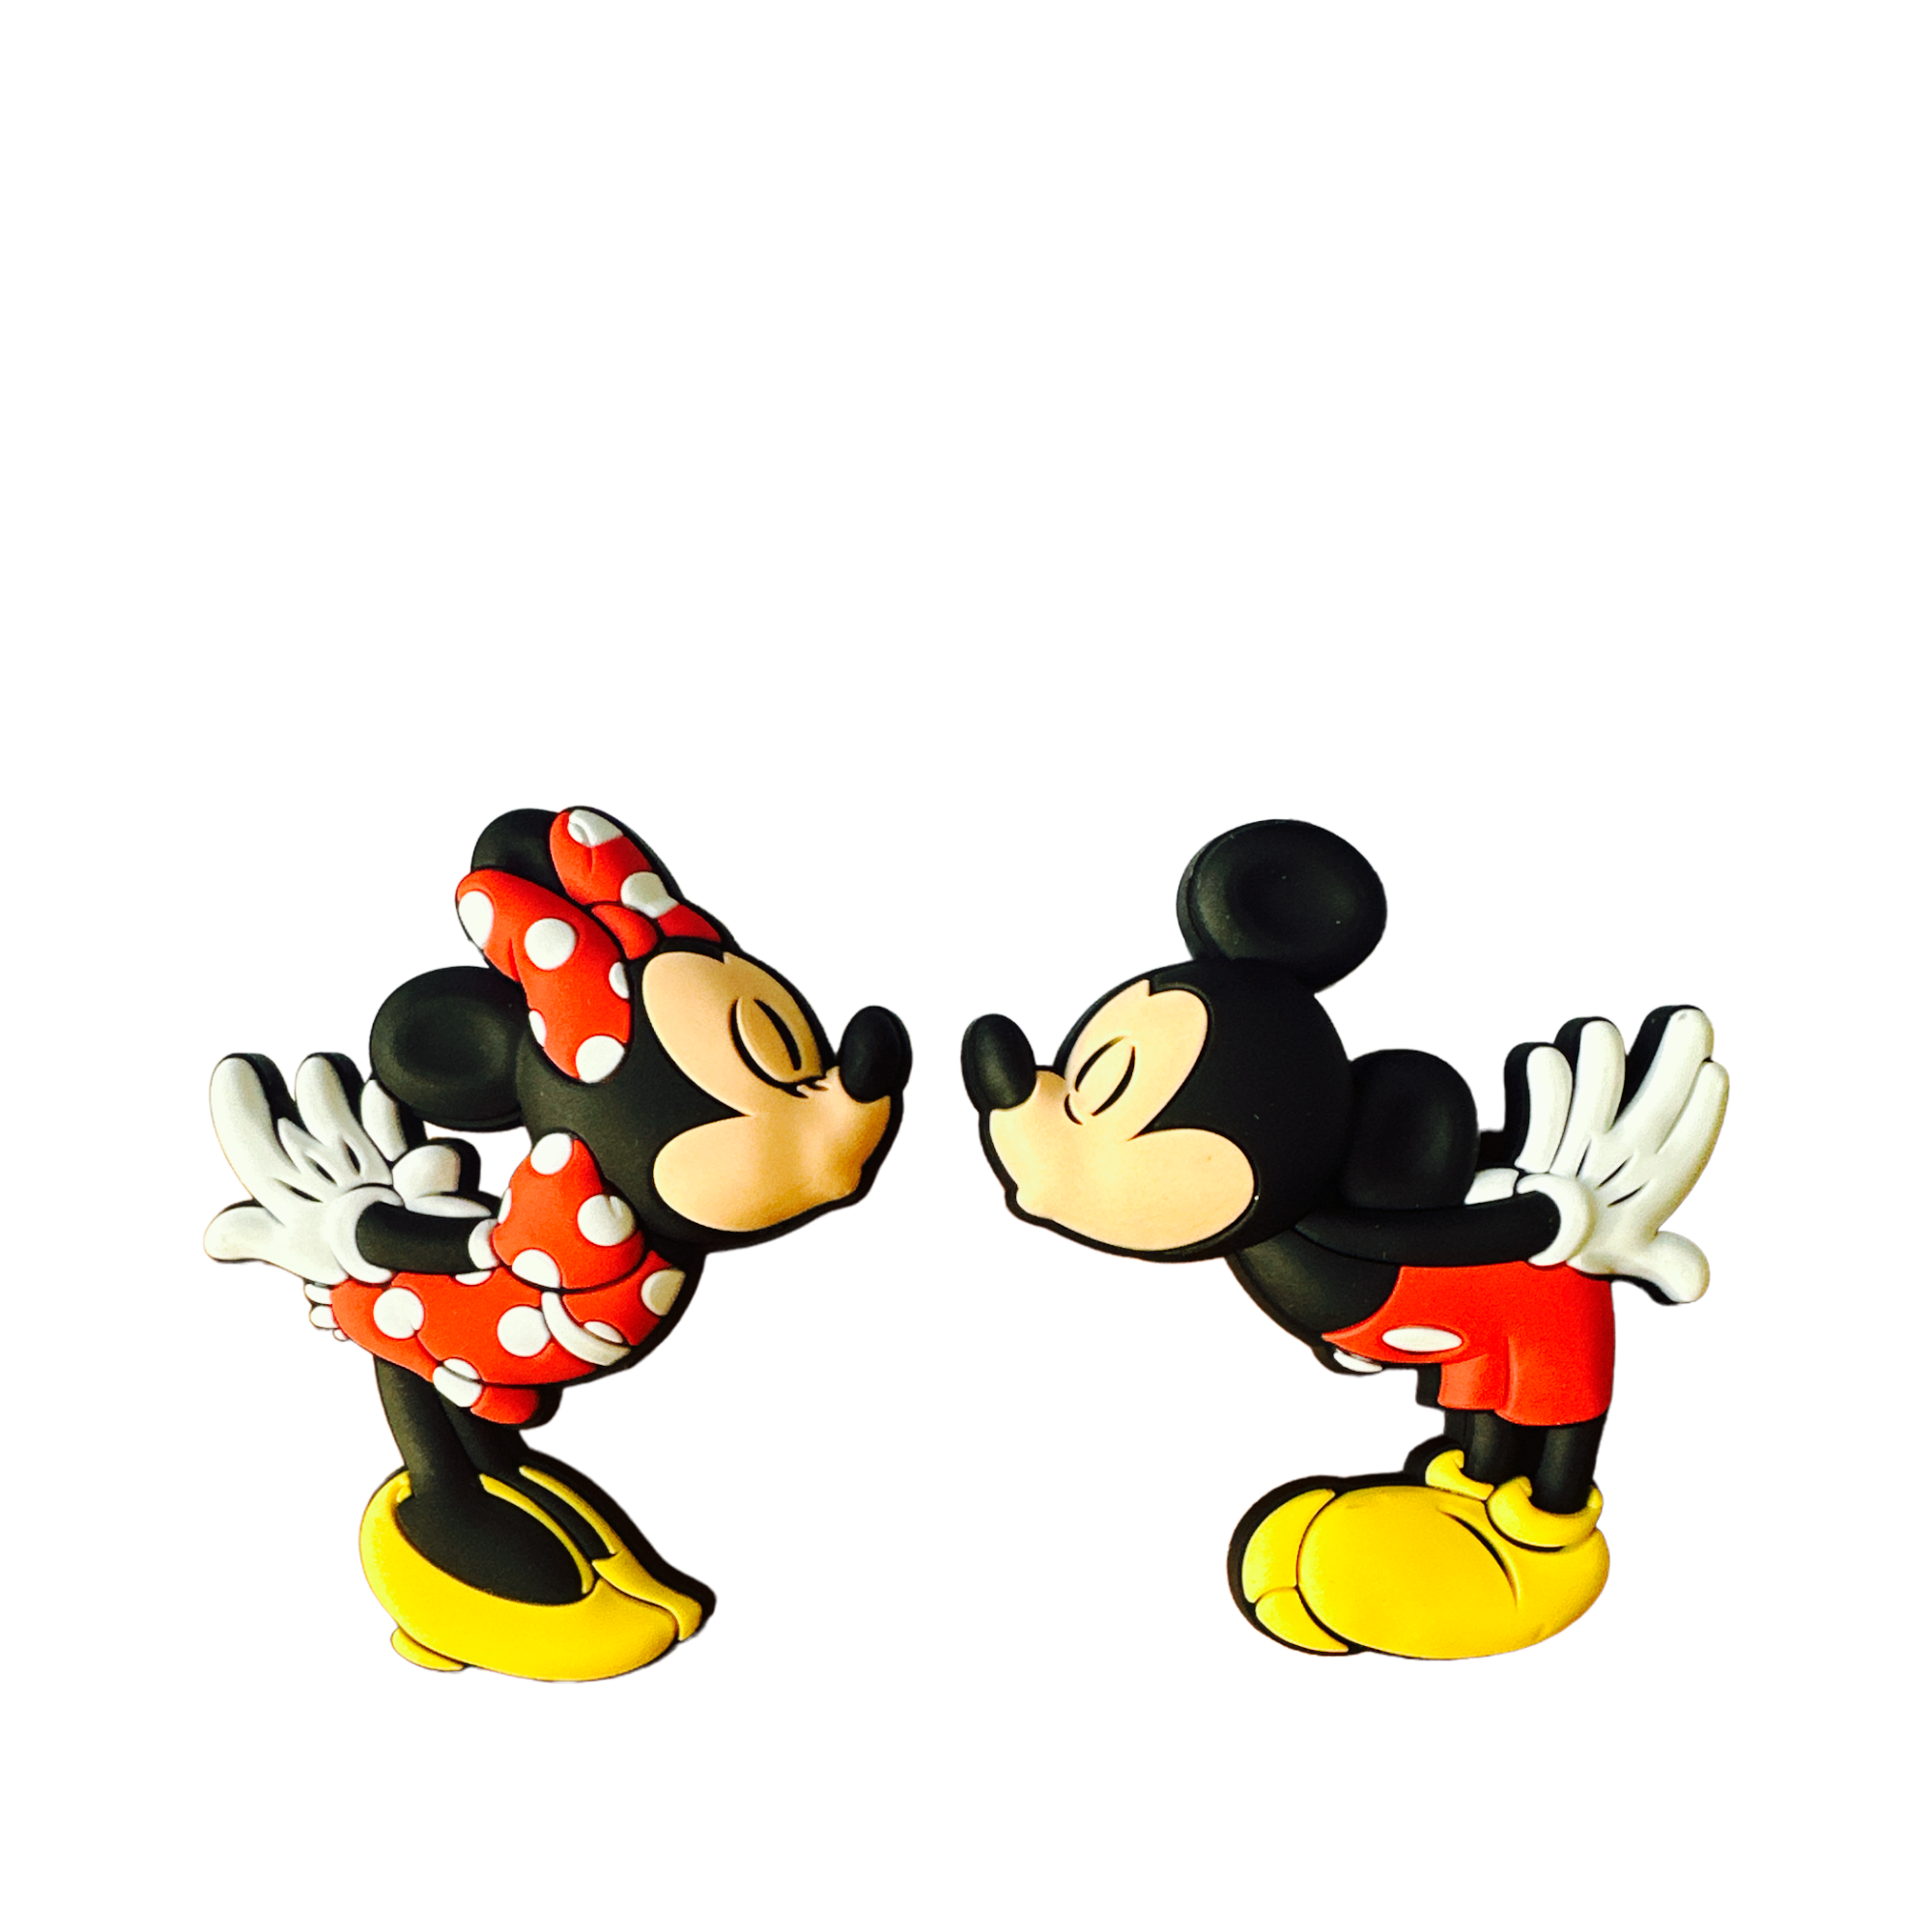 Disney - Mickey Mouse : Magnet duo MK